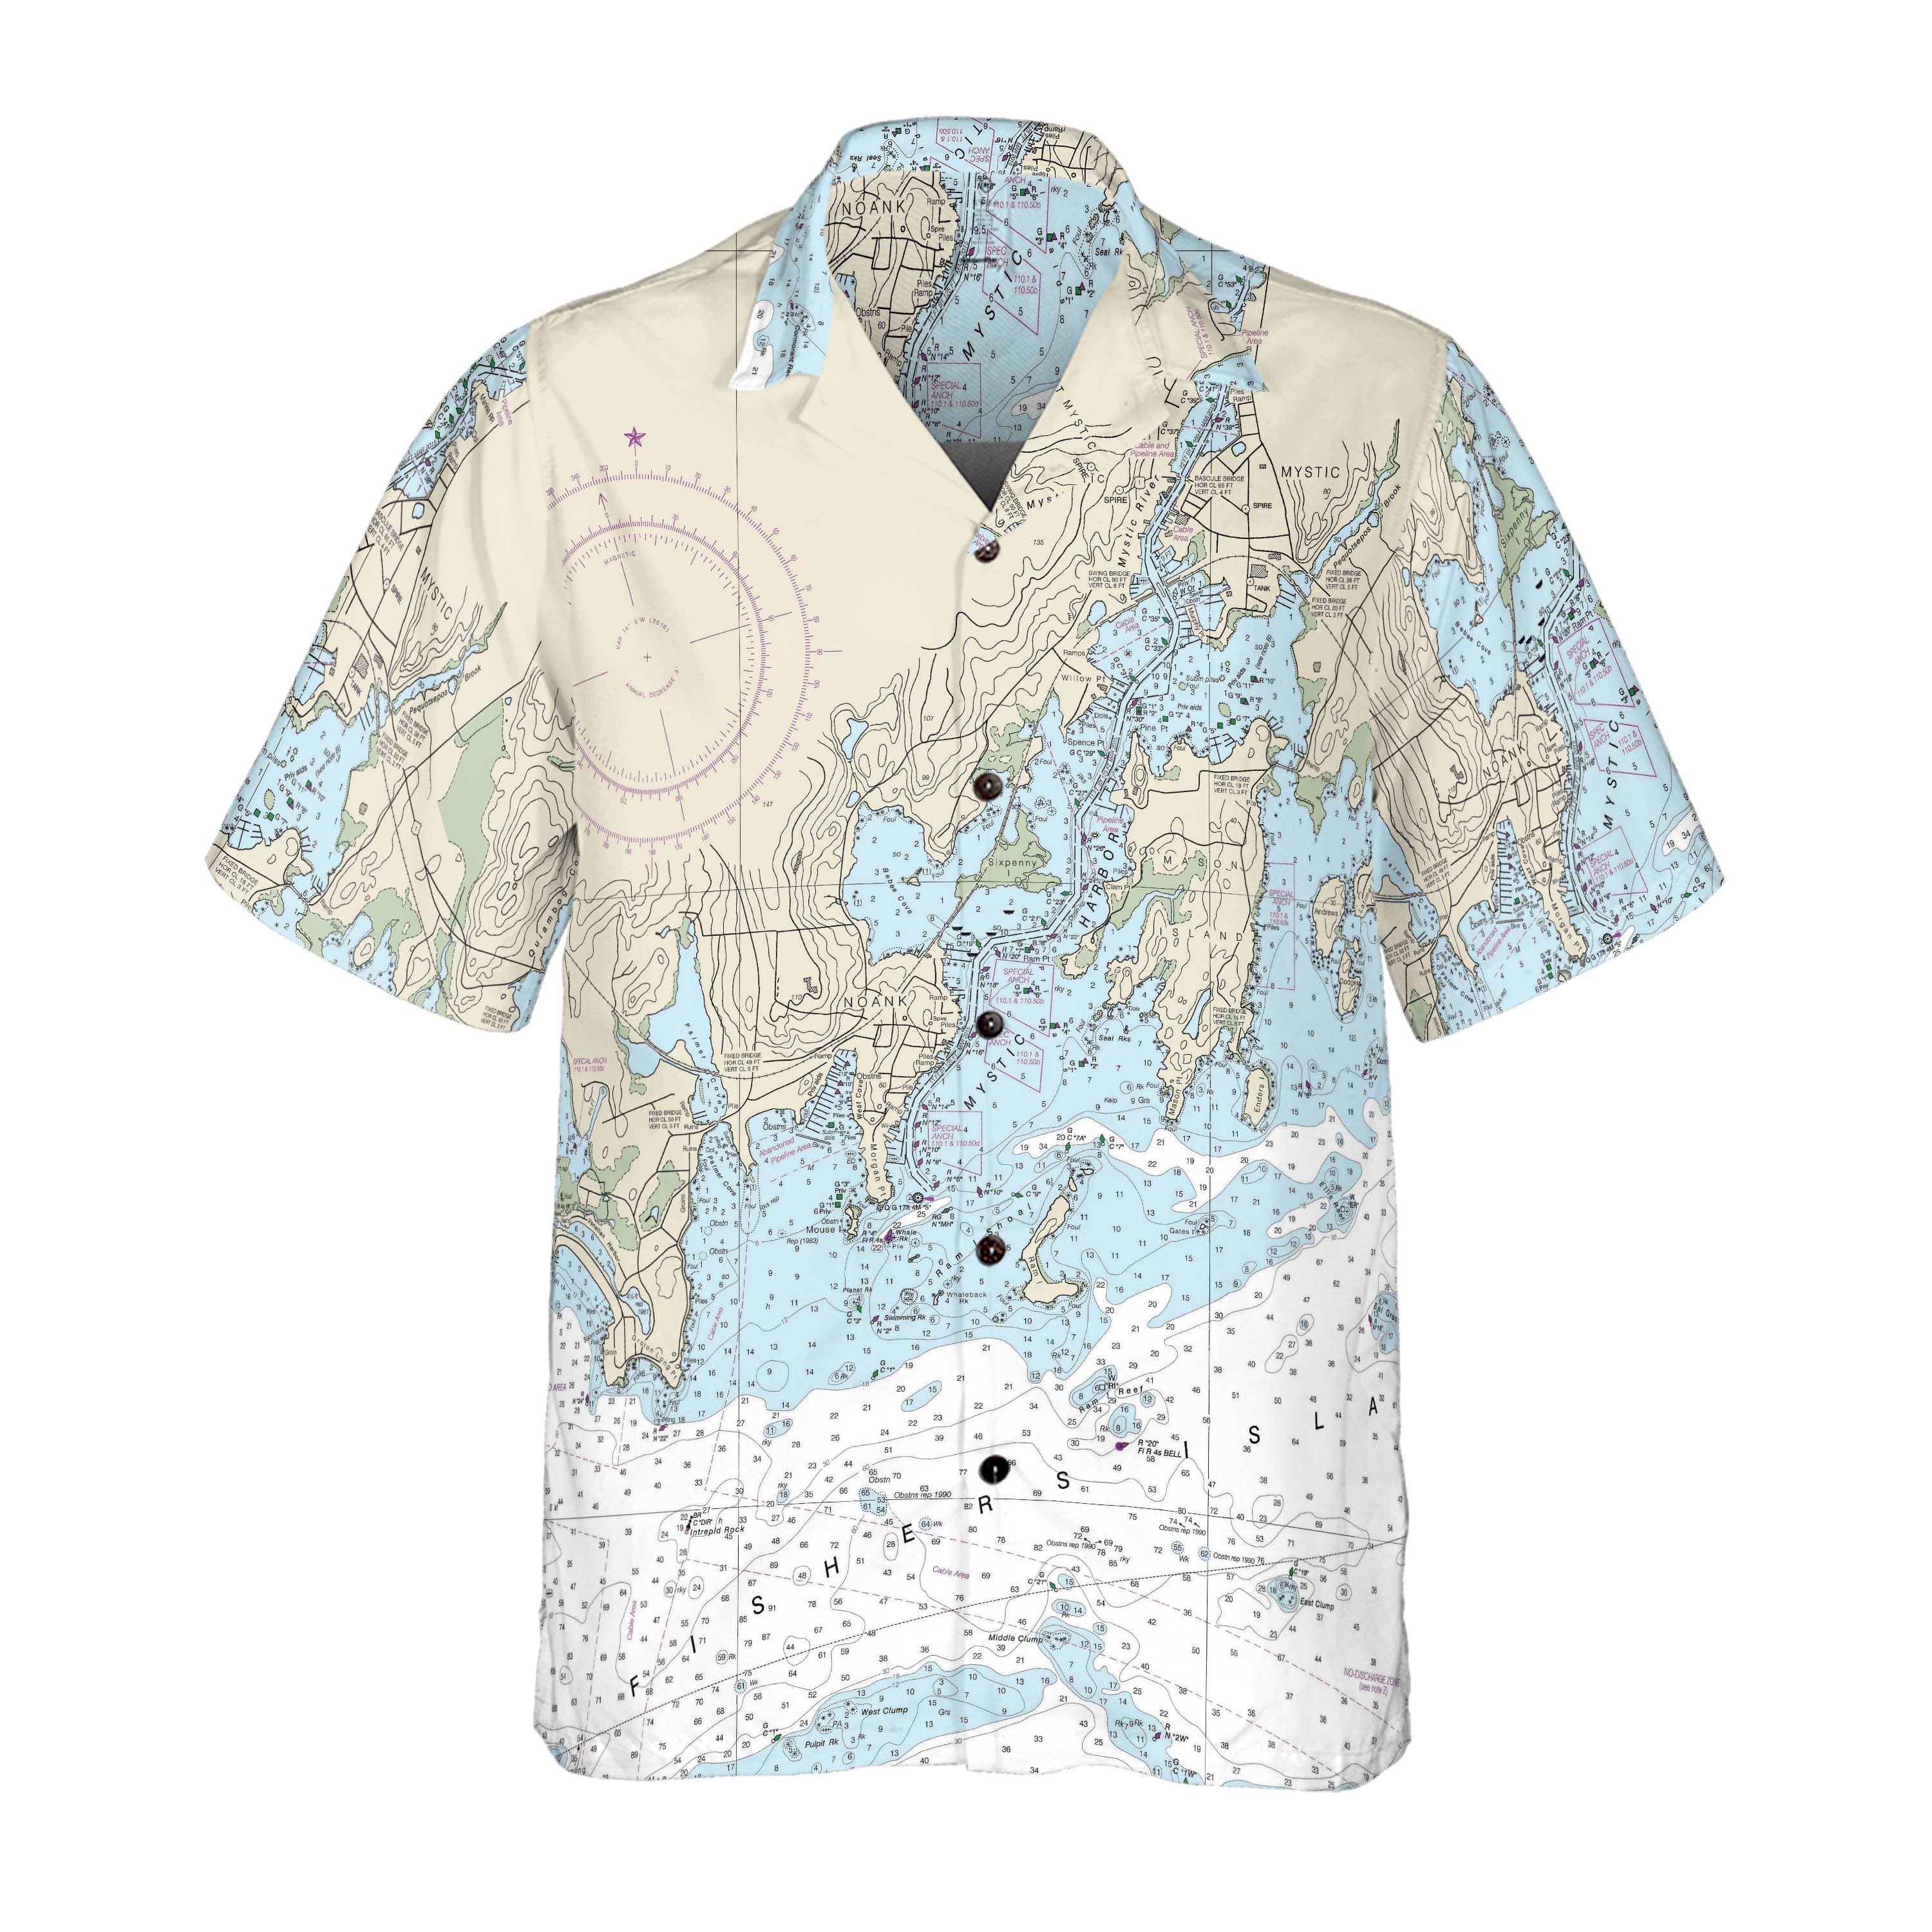 The Mystic Harbor Coconut Button Camp Shirt